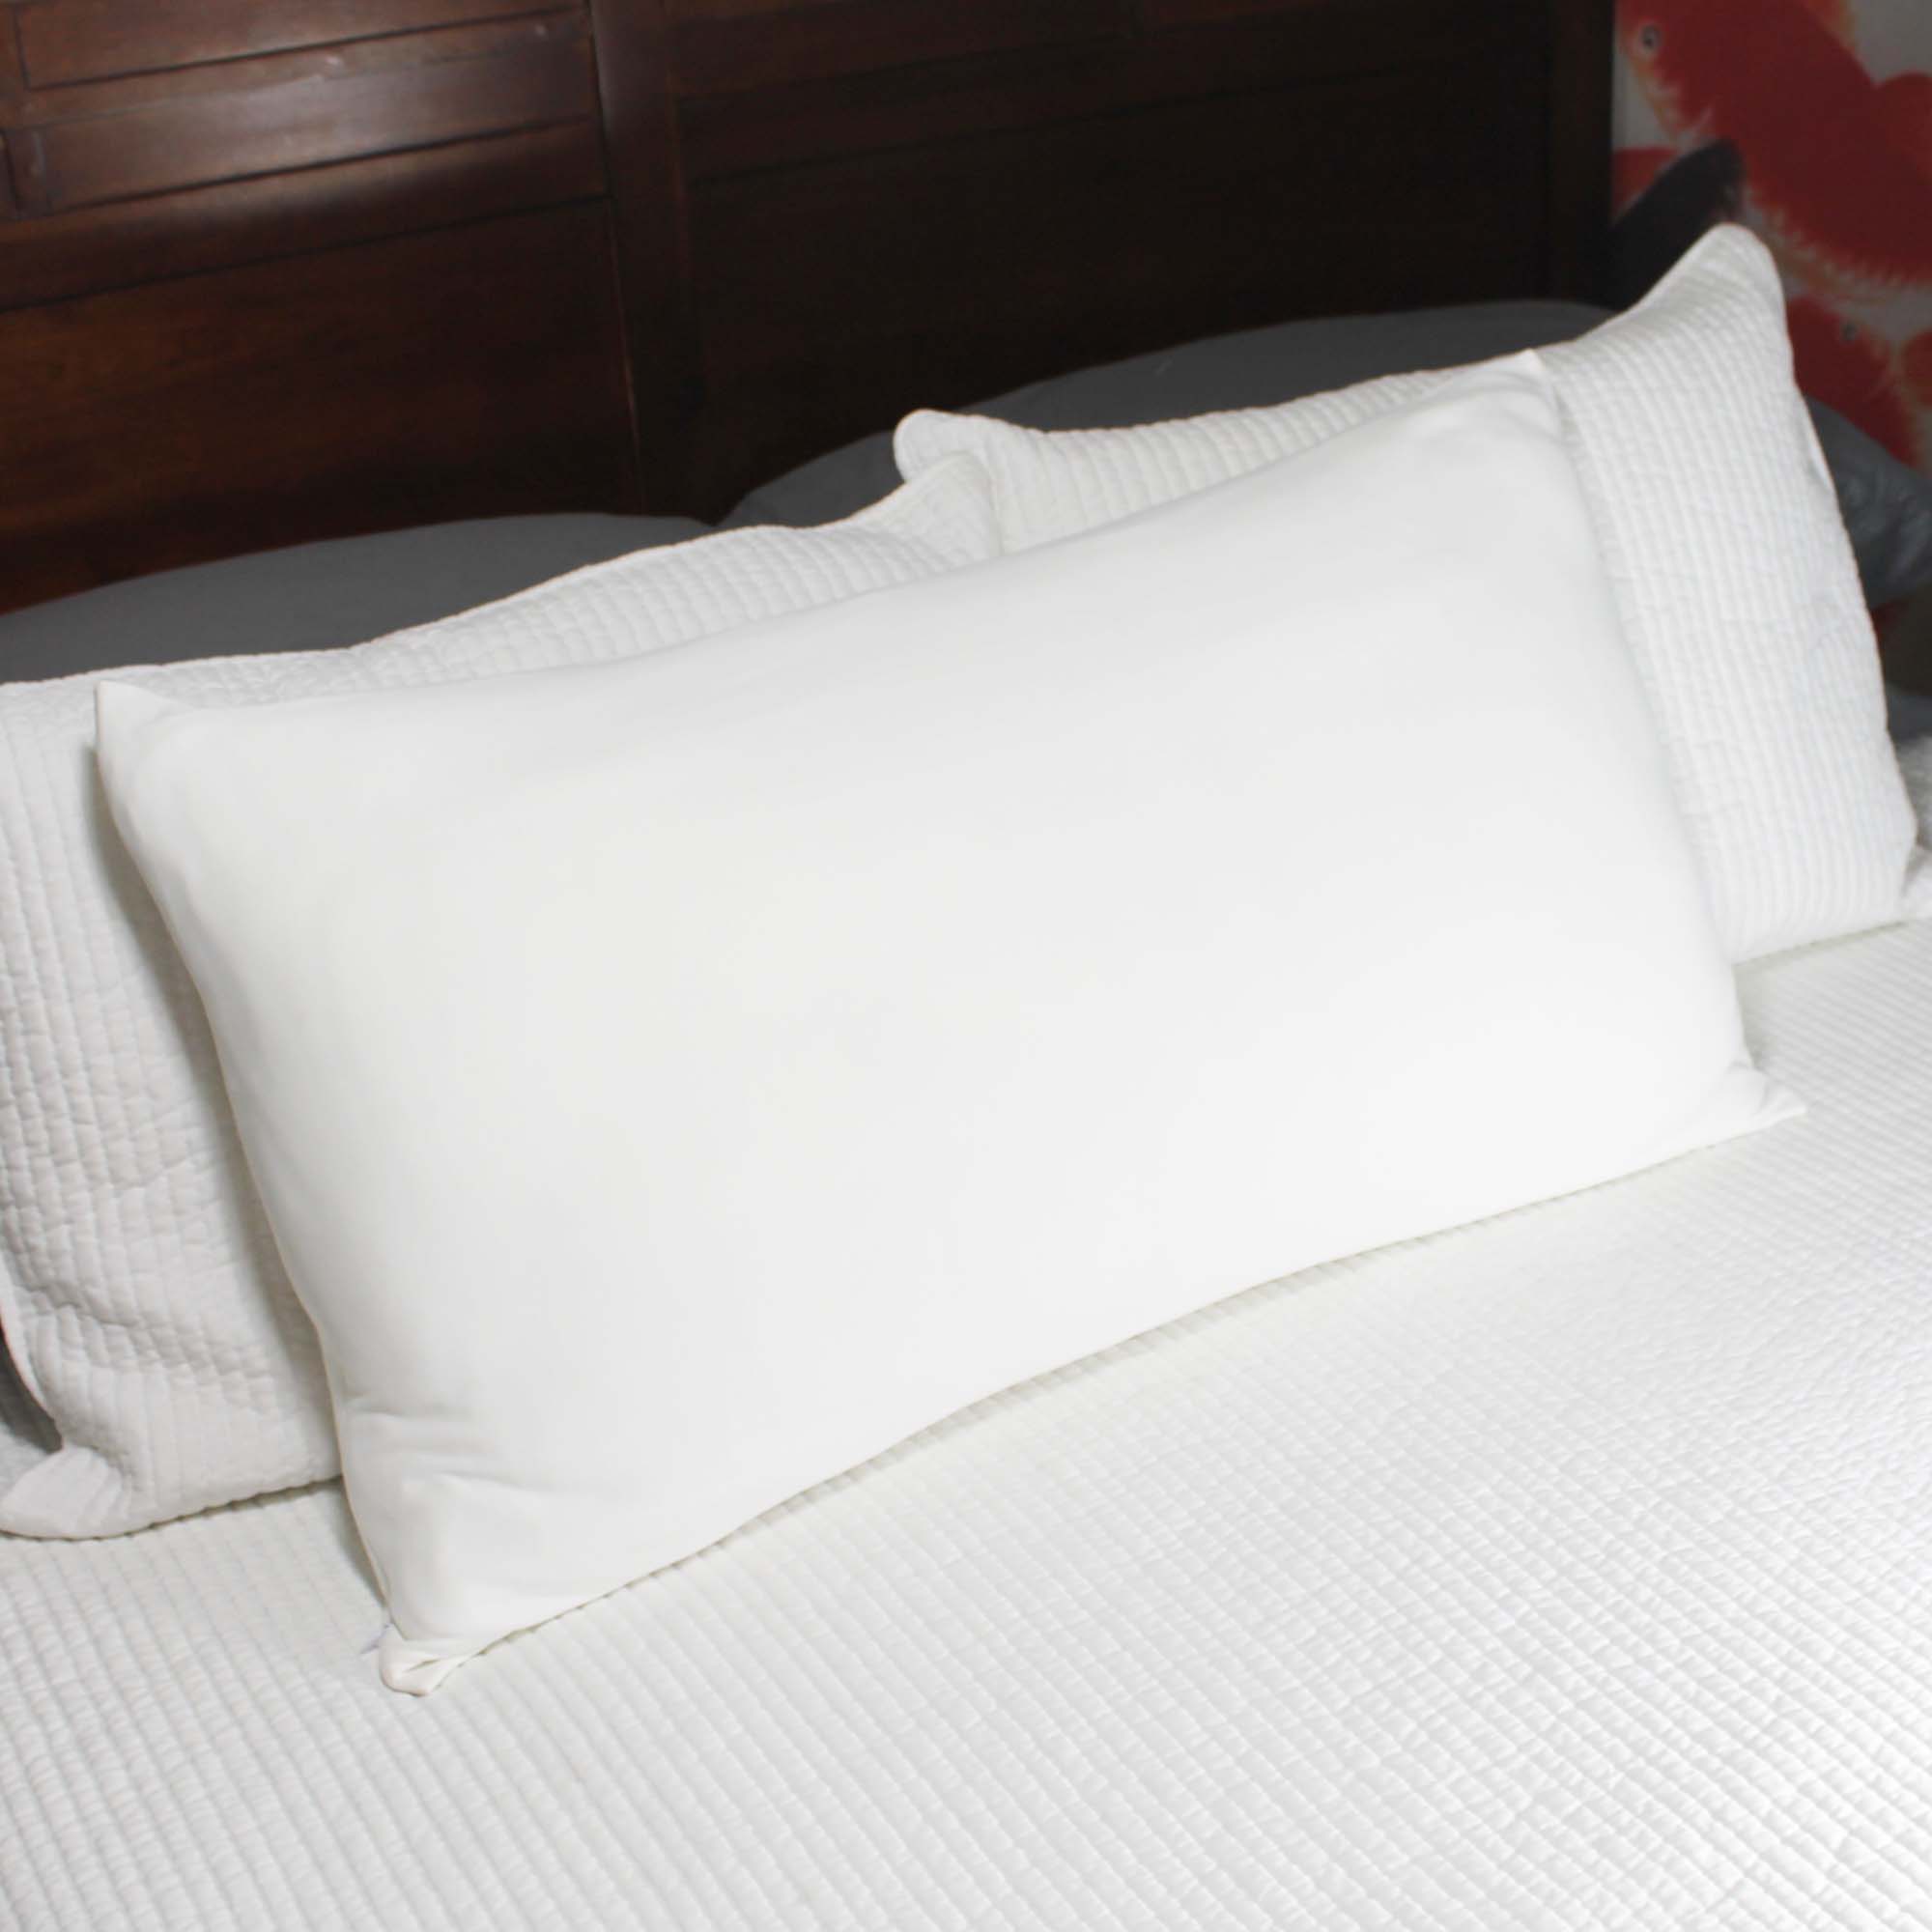 What Is The Size Of A King-Size Pillowcase?